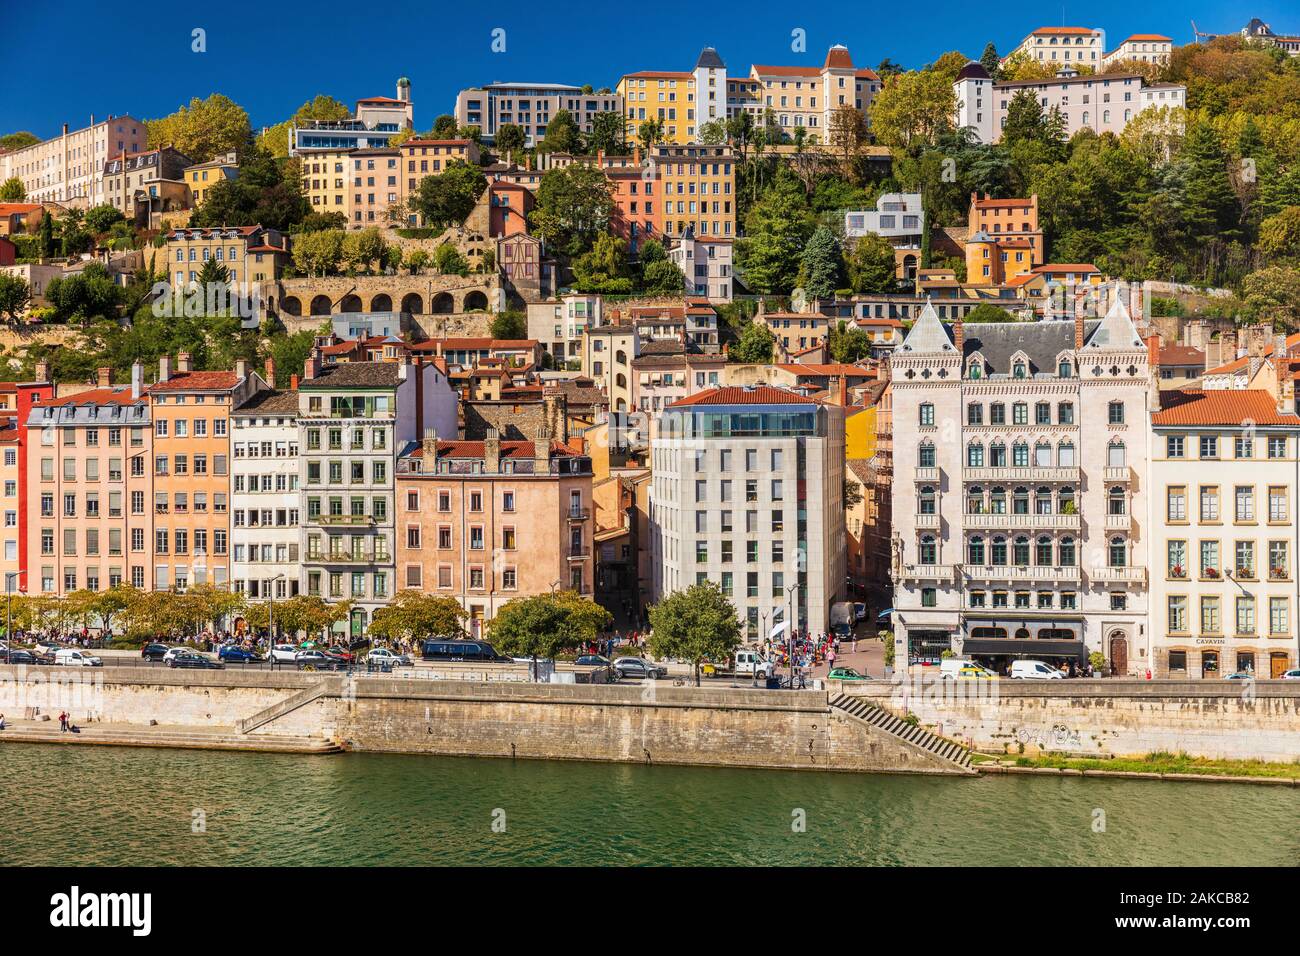 France, Rhone, Lyon, historic district listed as a UNESCO World Heritage site, Old Lyon, Quai Fulchiron on the banks of the Saone river, view of the Maison Blanchon Stock Photo